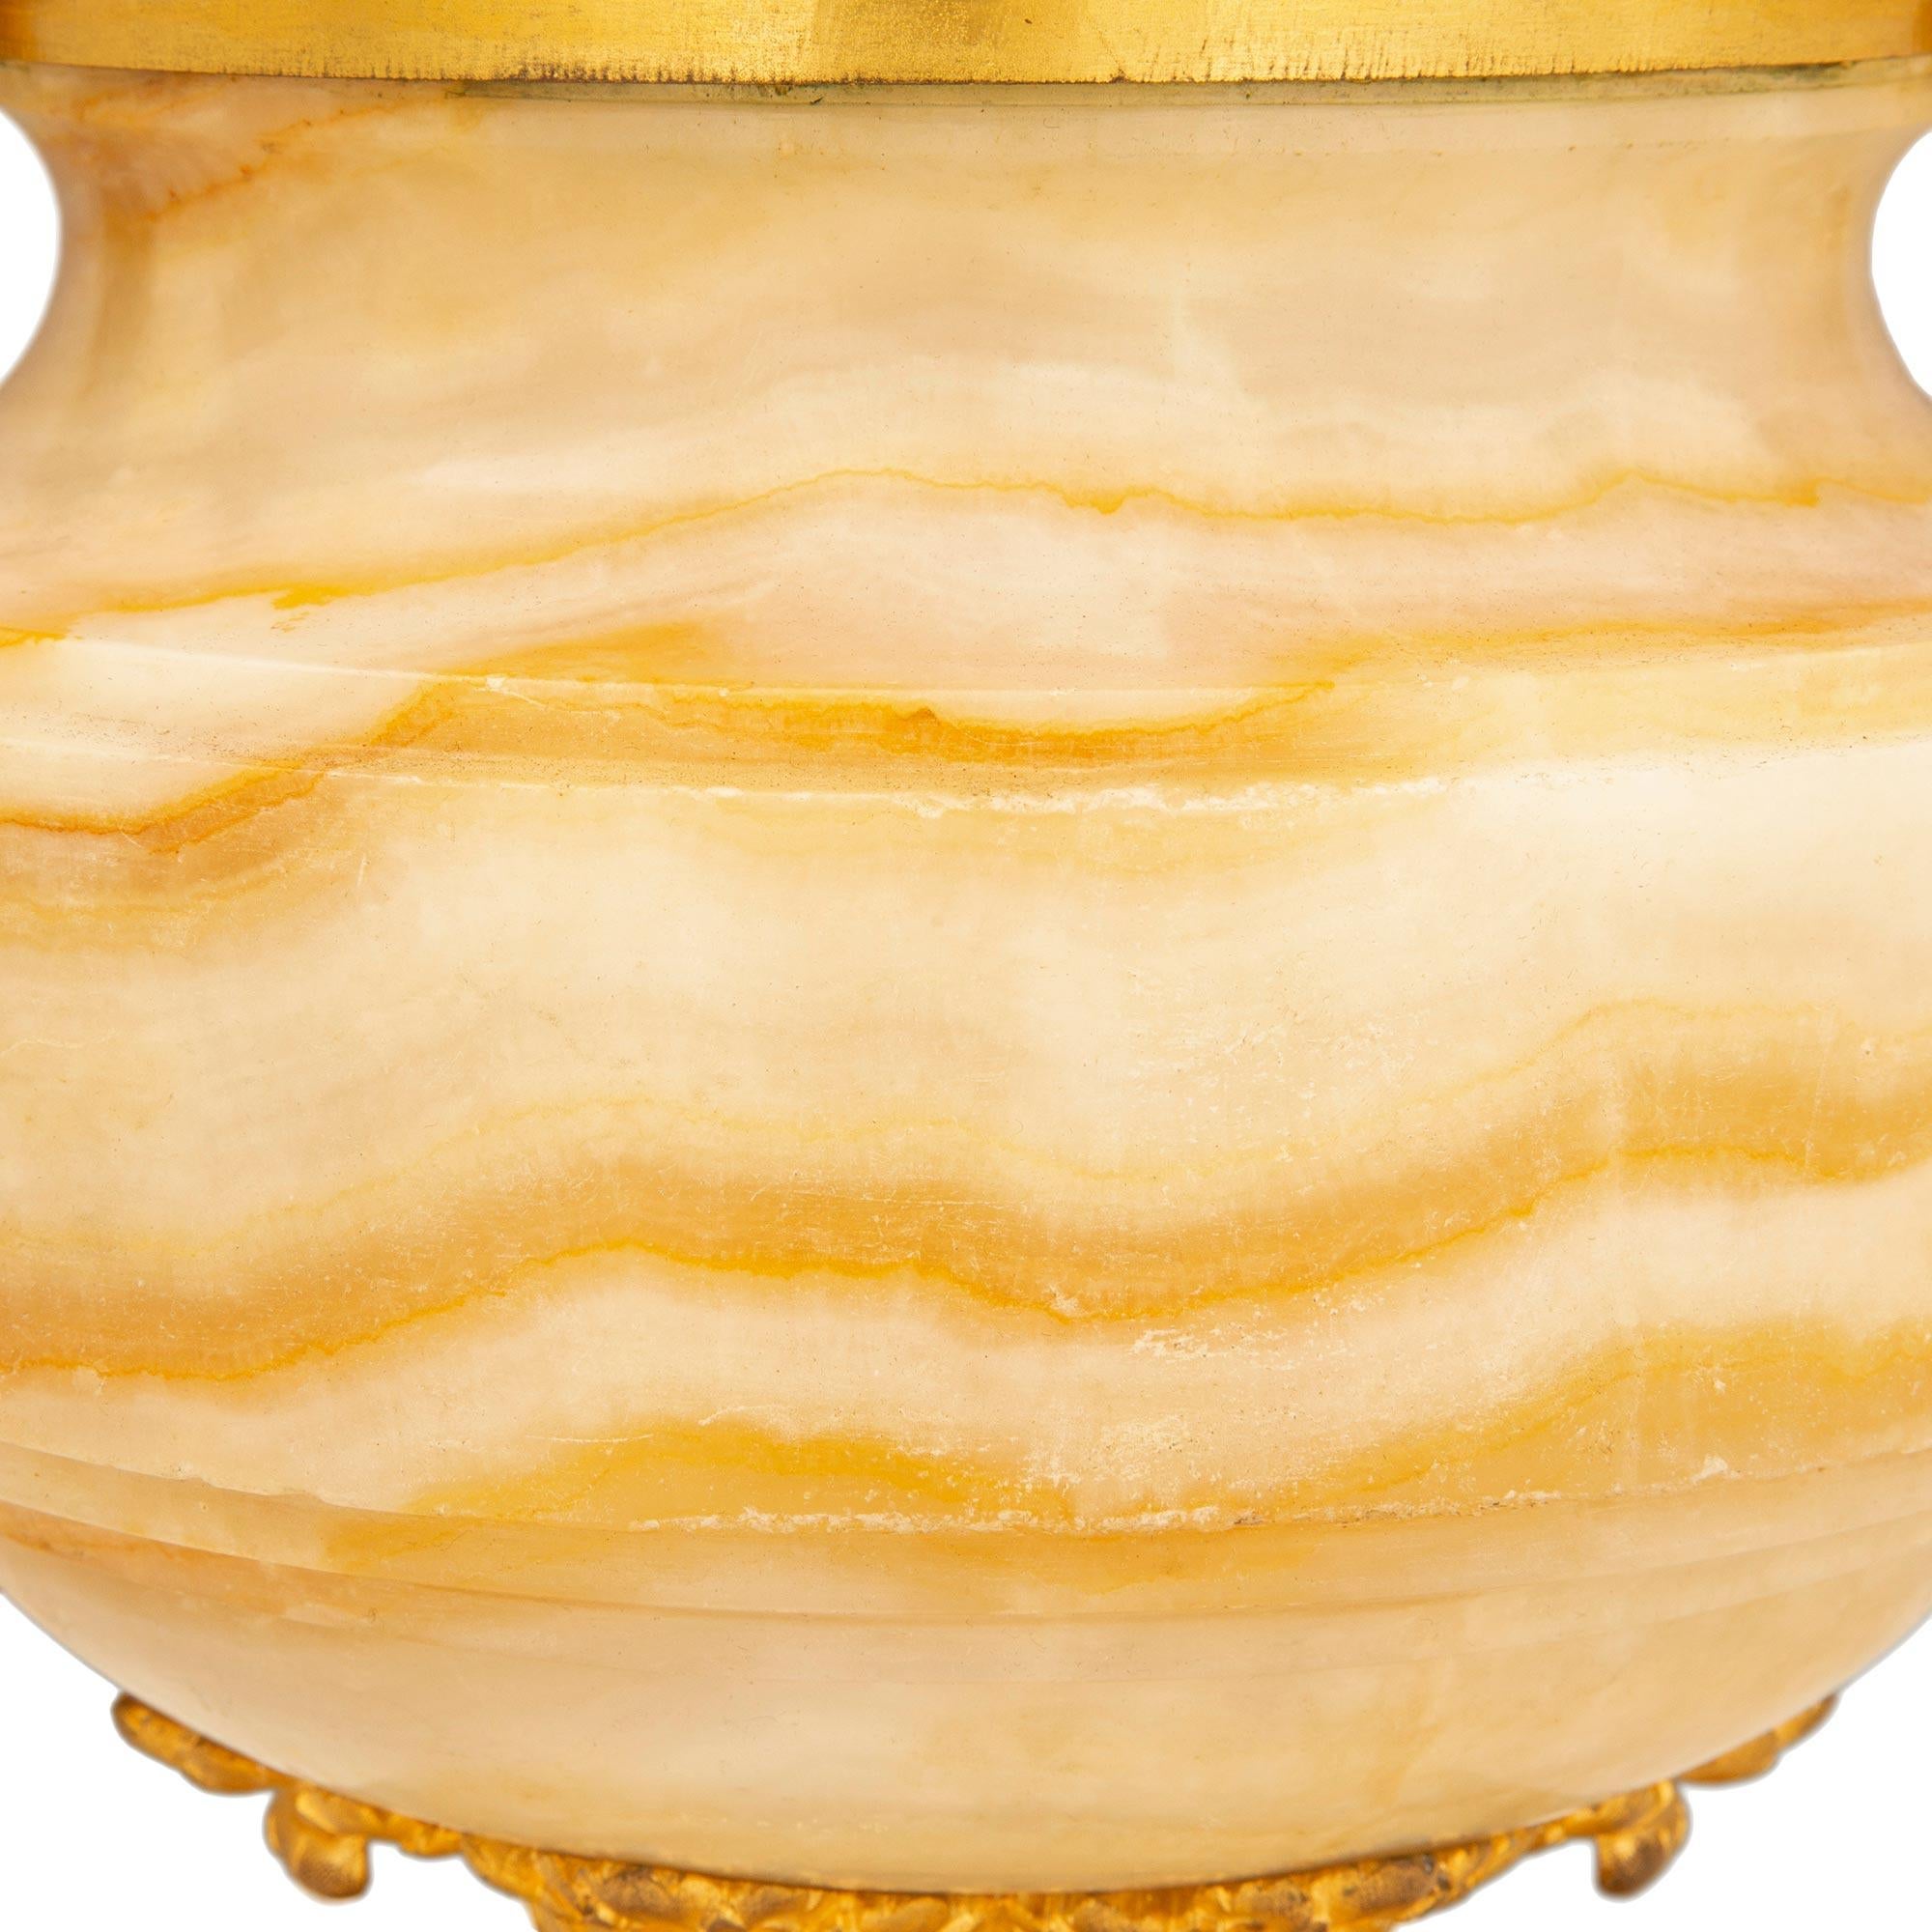 French 19th Century Louis XVI St. Belle Époque Period Onyx and Ormolu Urn For Sale 5